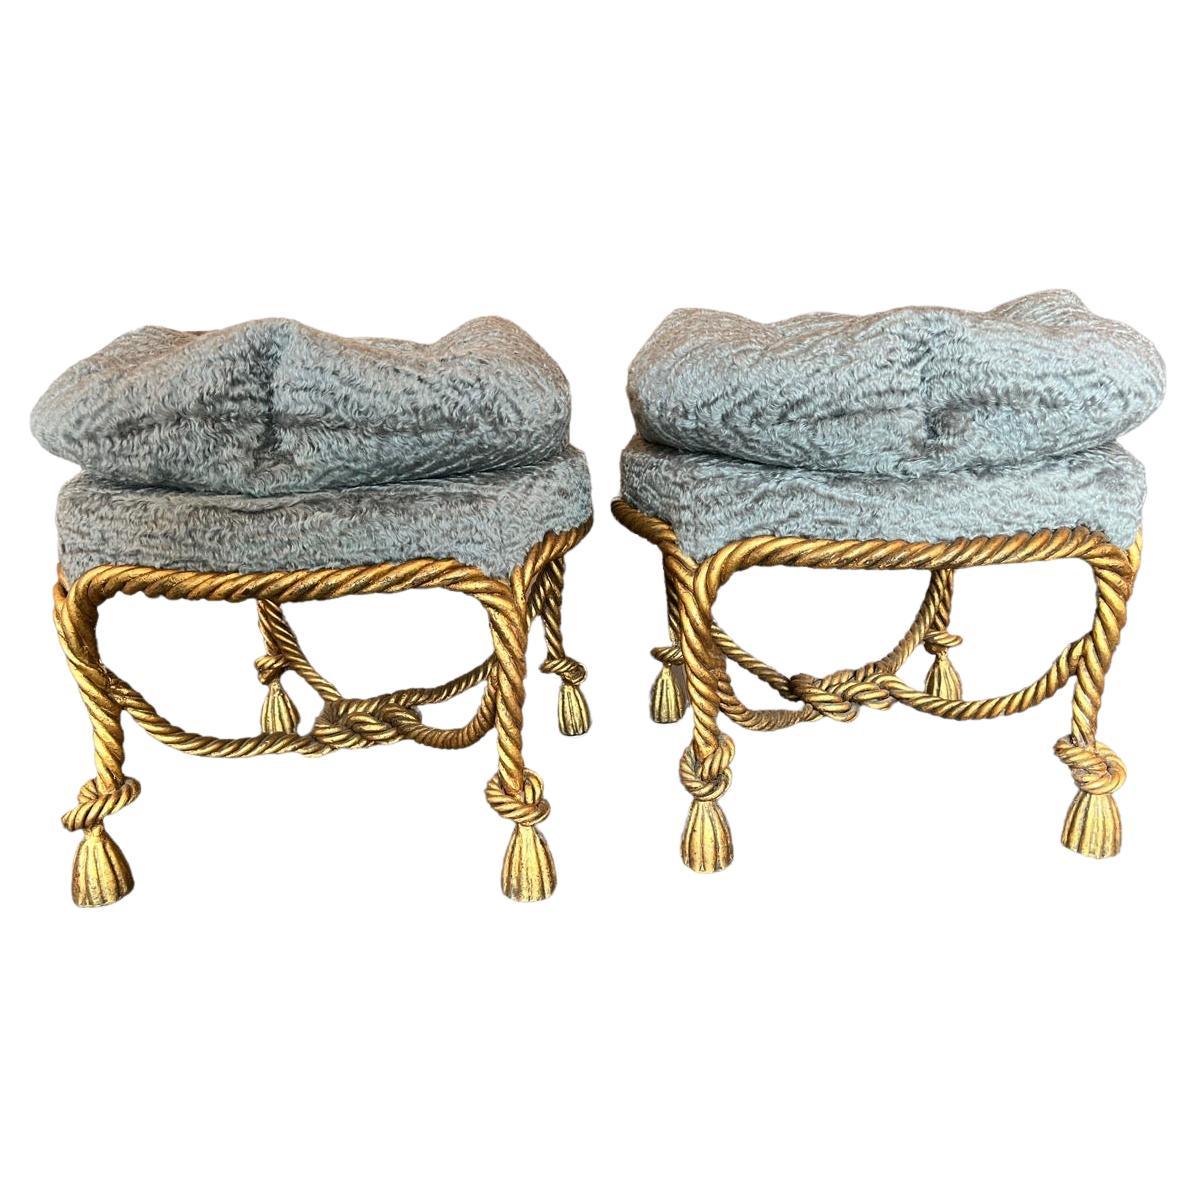 Pair of Early 20th Century Italian Gilt Gold Metal Rope Stools